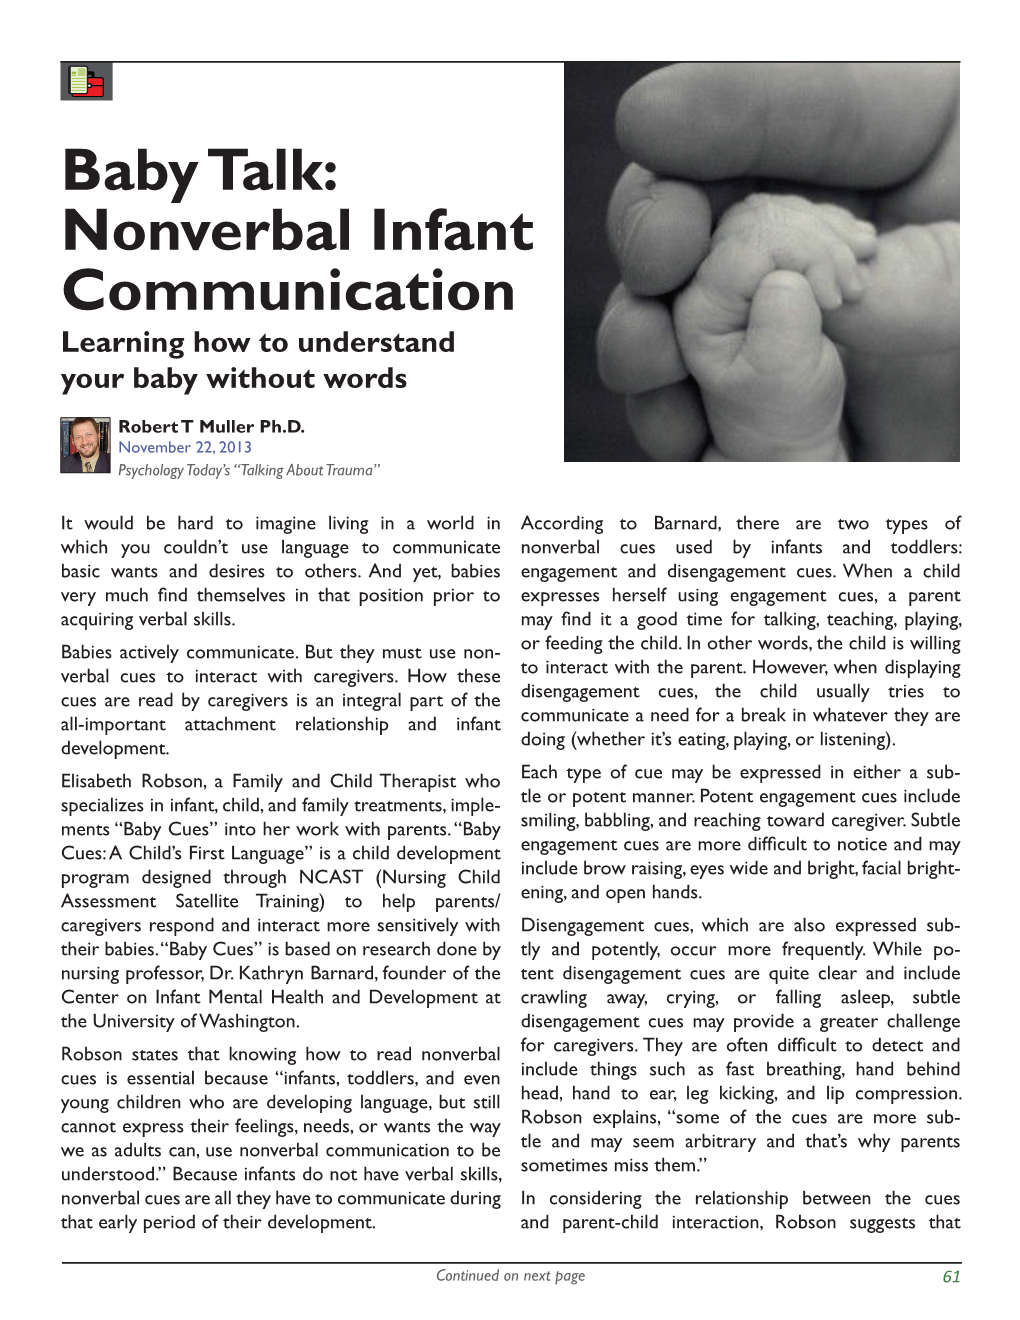 Baby Talk: Nonverbal Infant Communication Learning How to Understand Your Baby Without Words